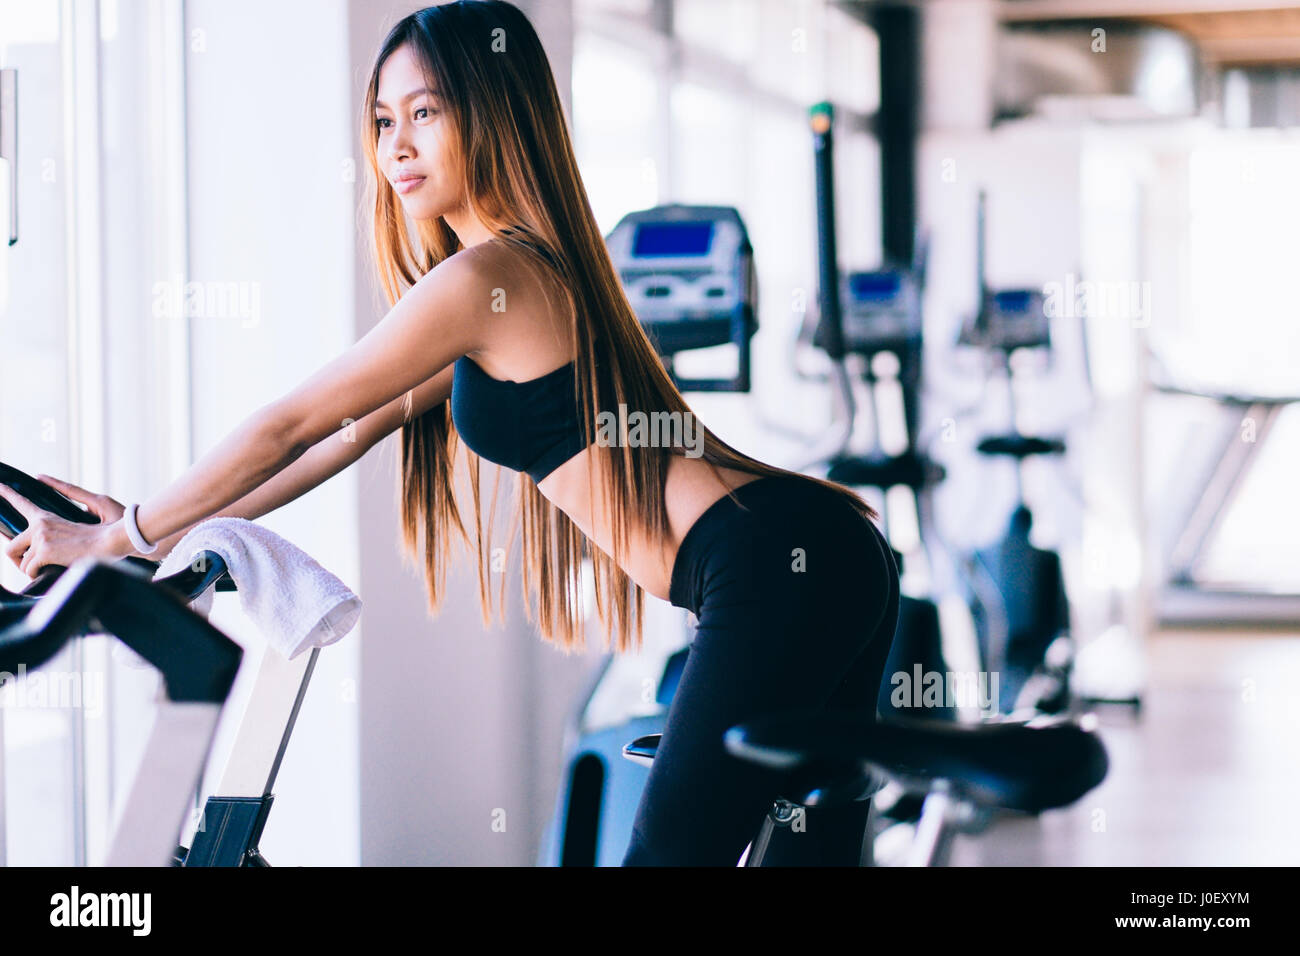 Sport young woman on a stationary bike in the gym Stock Photo